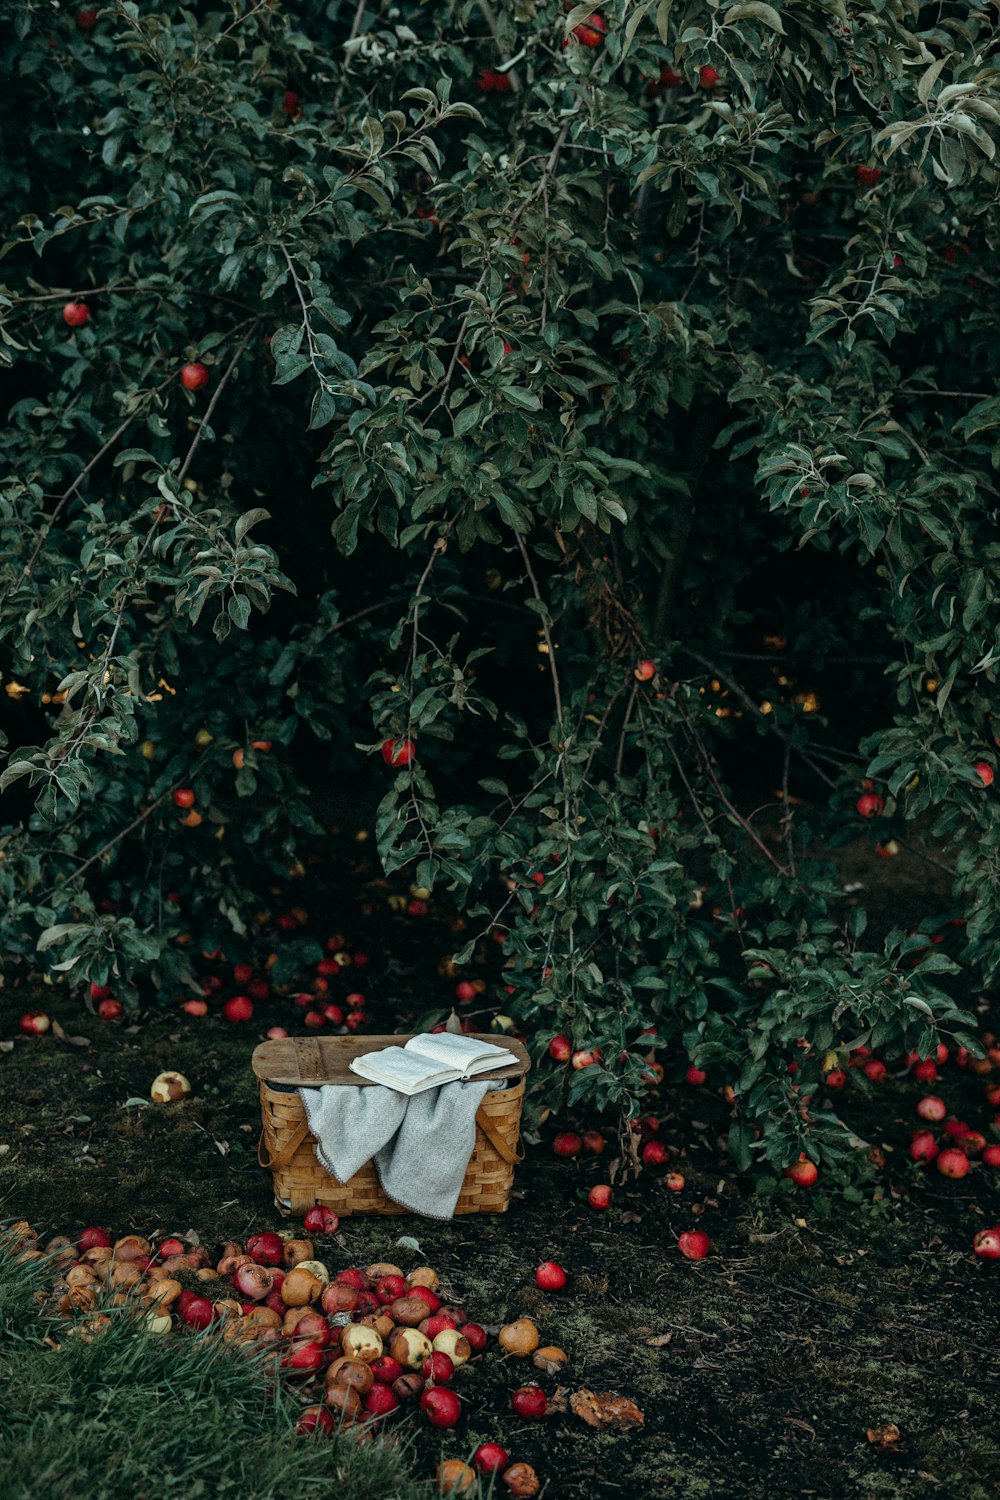 photo of basket near fruits and tree